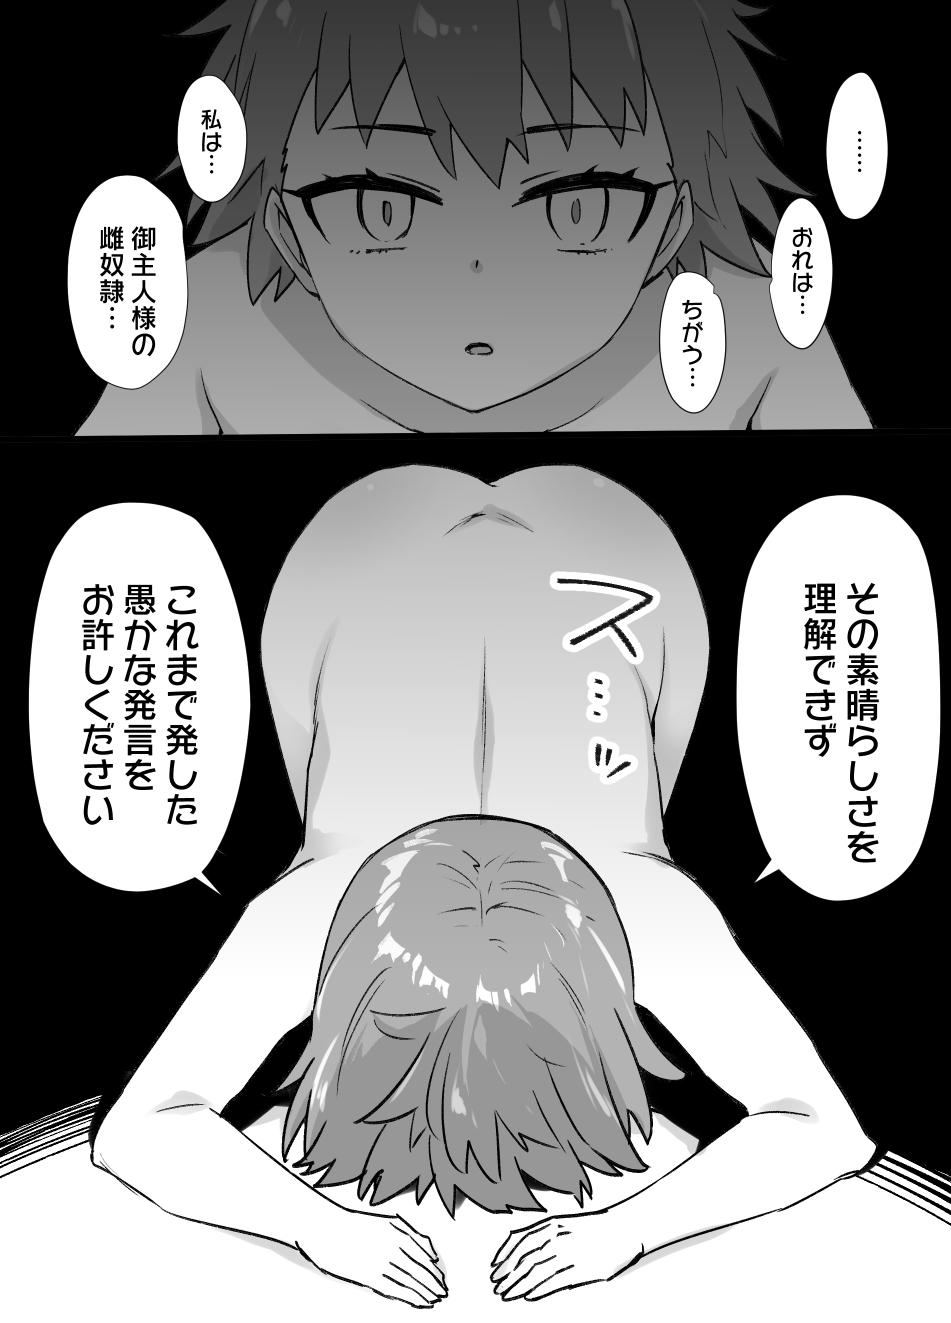 Motel A manga about Shirou Emiya who went to save Rin Tohsaka from captivity and is transformed into a female slave through physical feminization and brainwashing[Fate/ stay night) - Fate stay night Shecock - Page 6